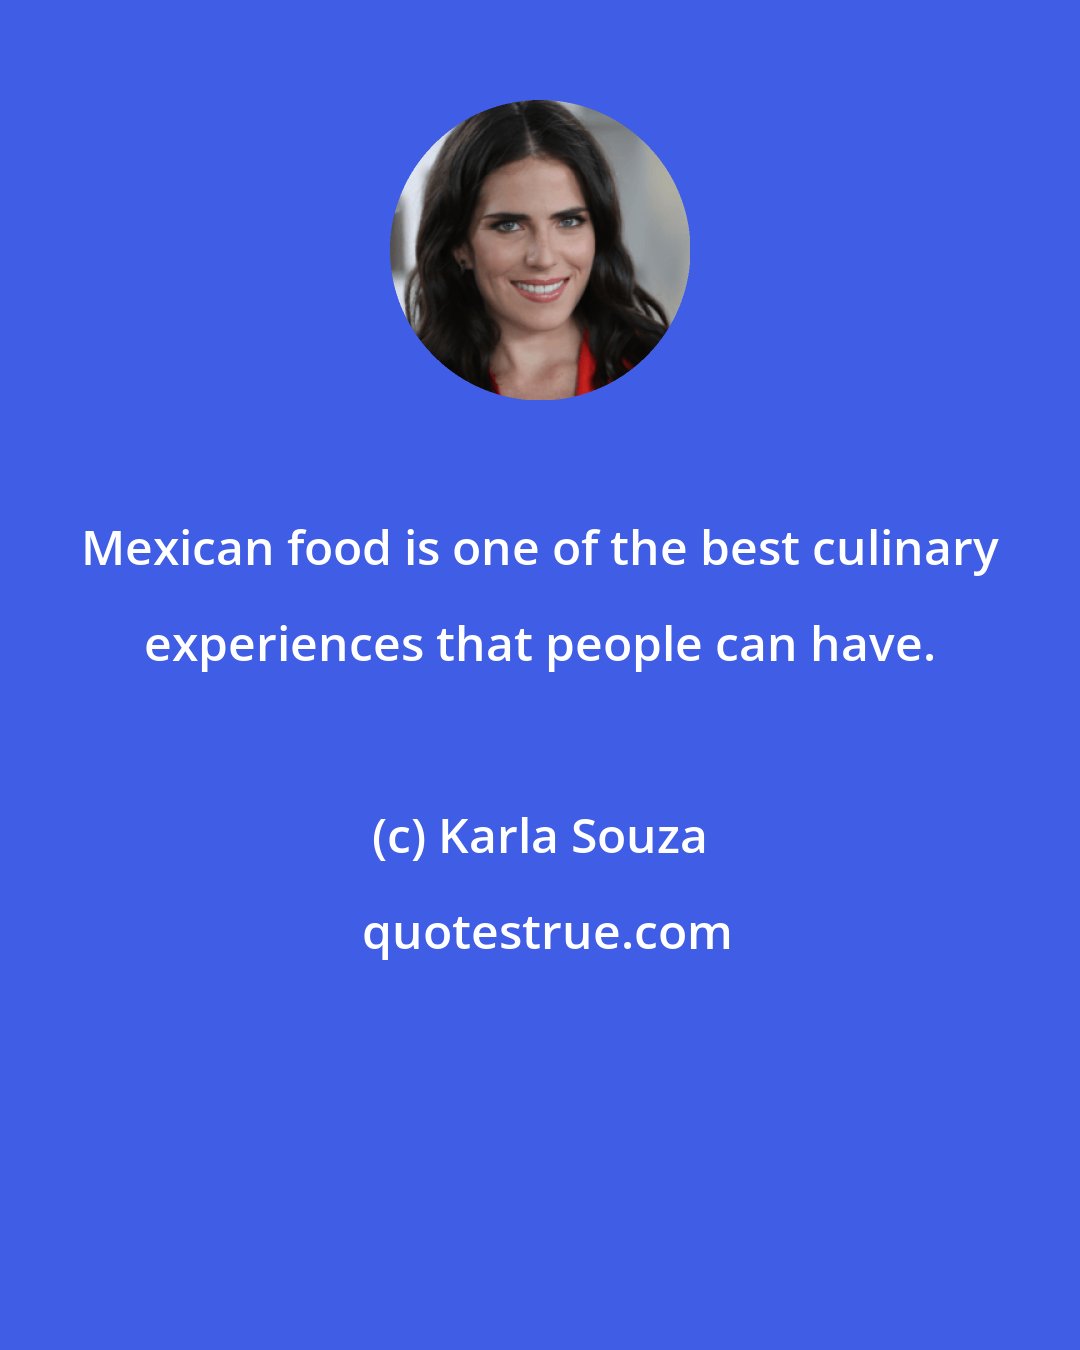 Karla Souza: Mexican food is one of the best culinary experiences that people can have.